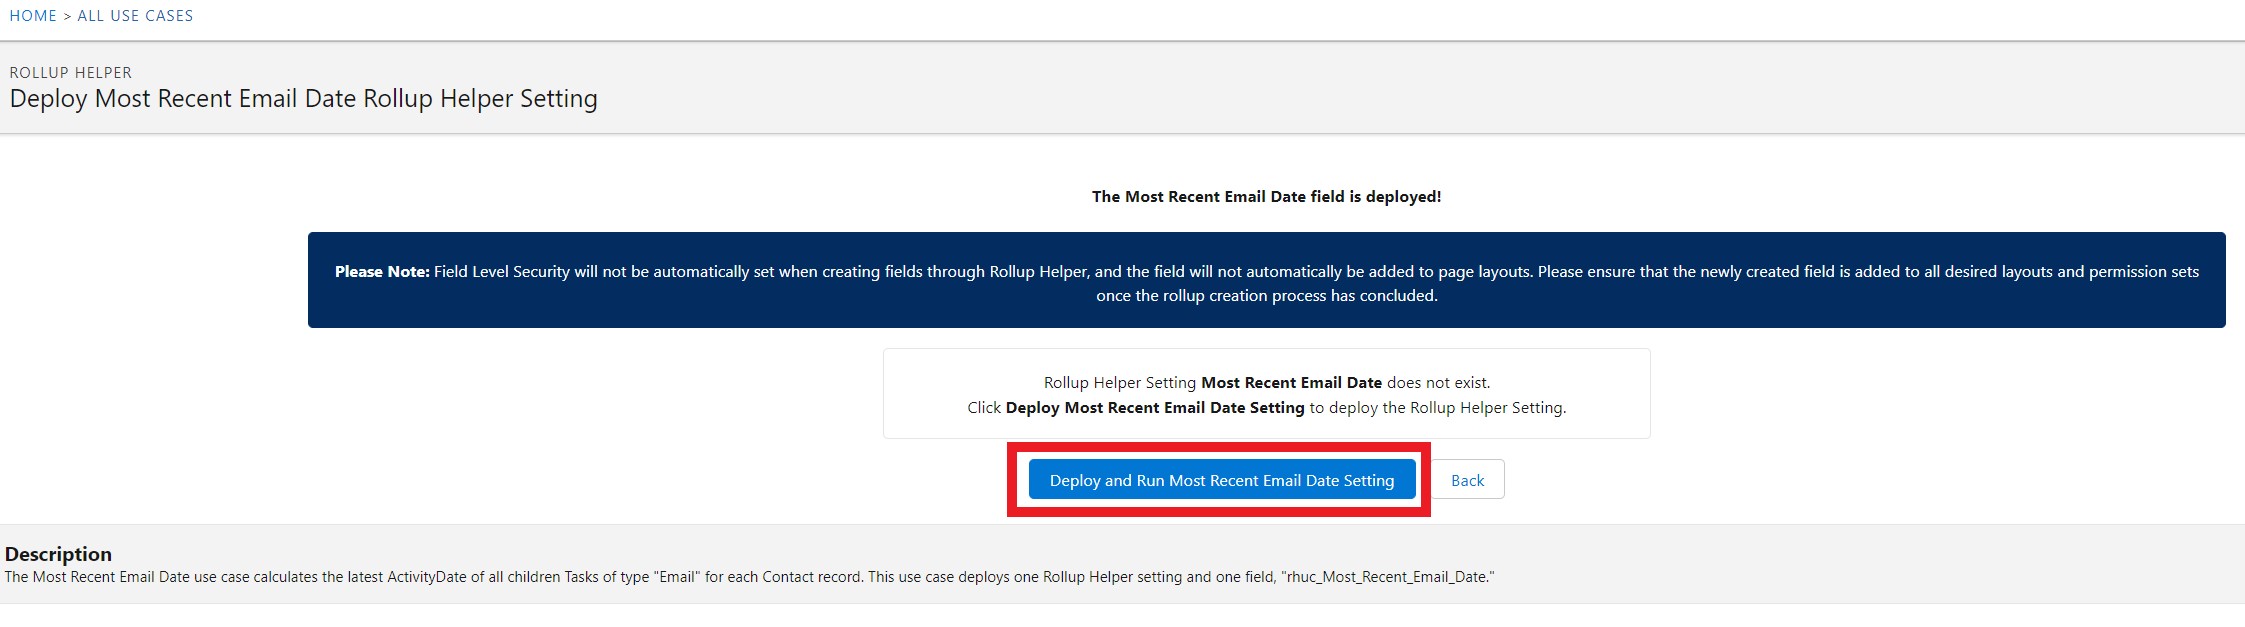 Most Recent Email Date deploy setting